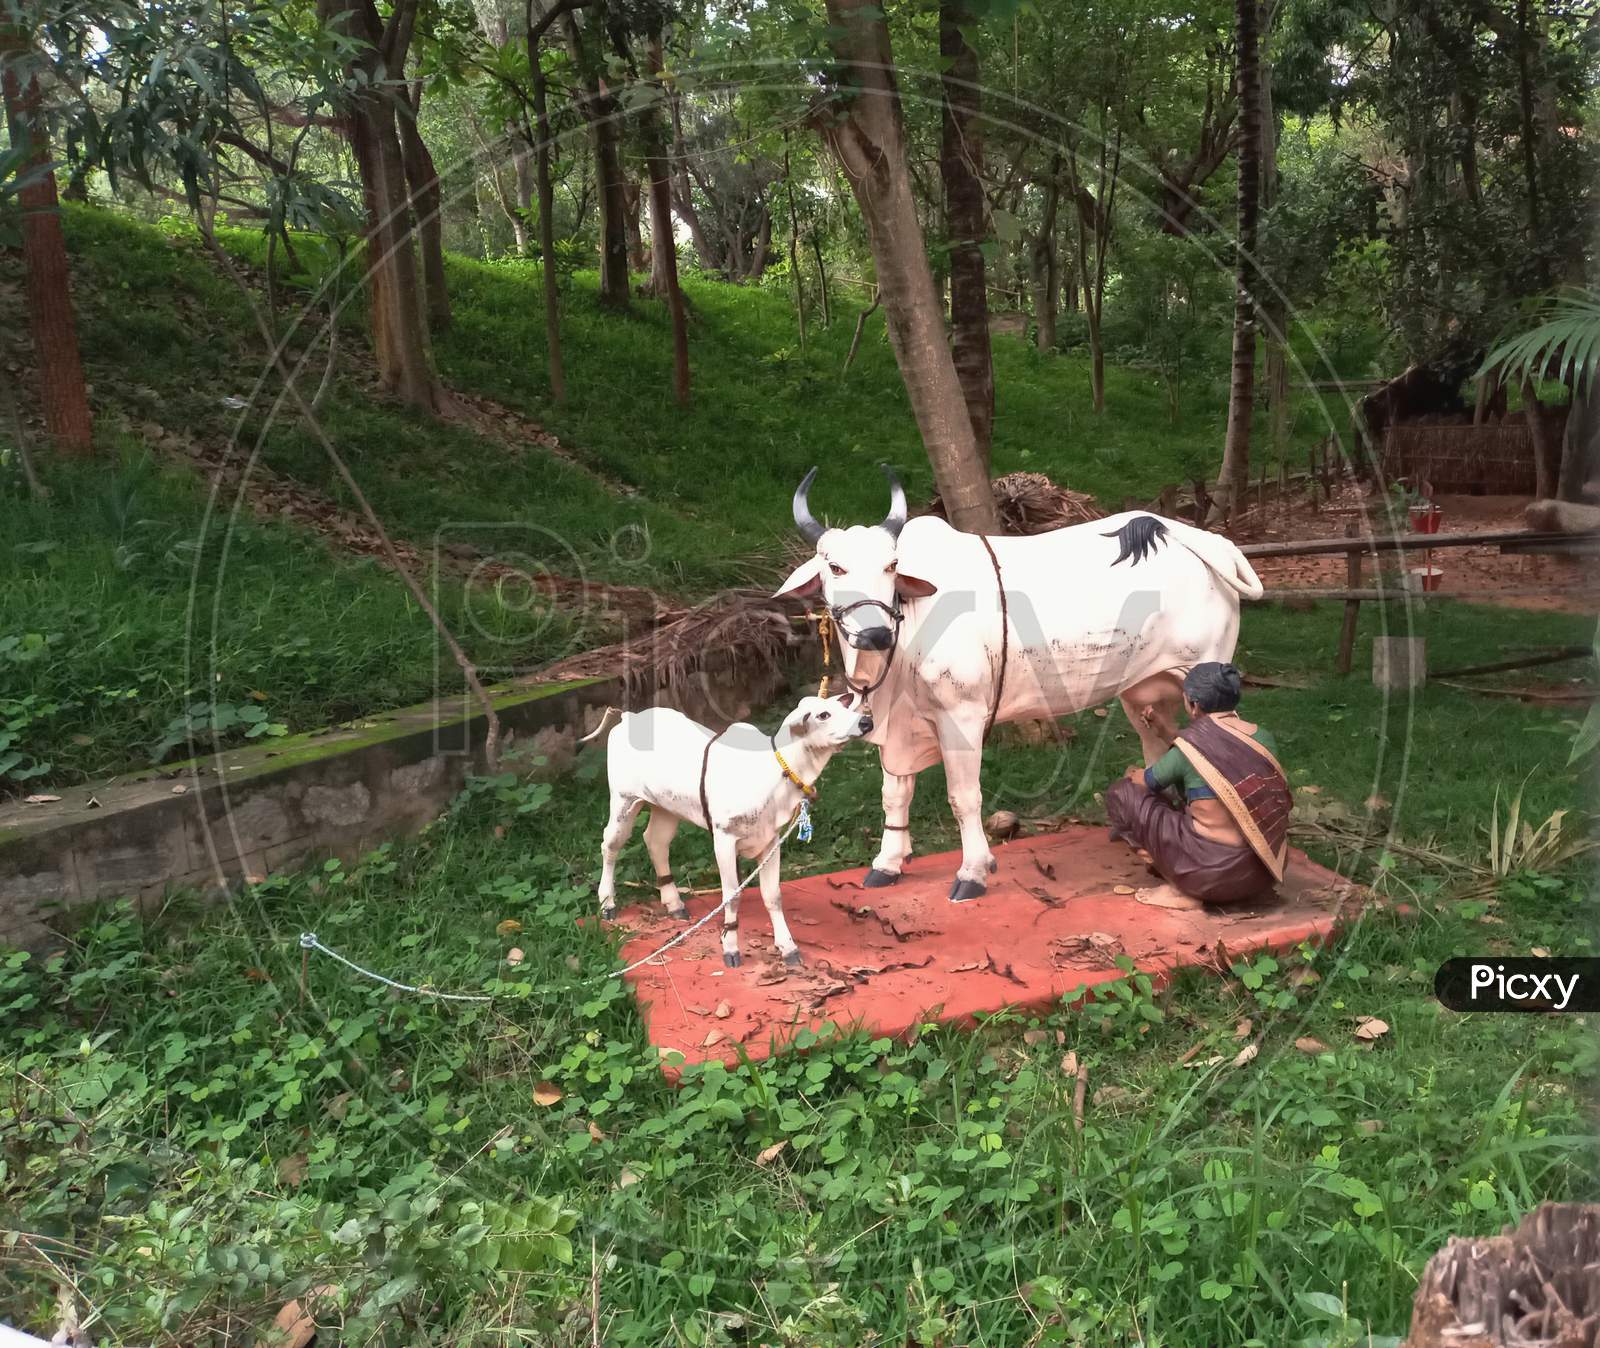 Outdoor sculptures of farm animals of cow calf and people in a folk art museum Janapada loka